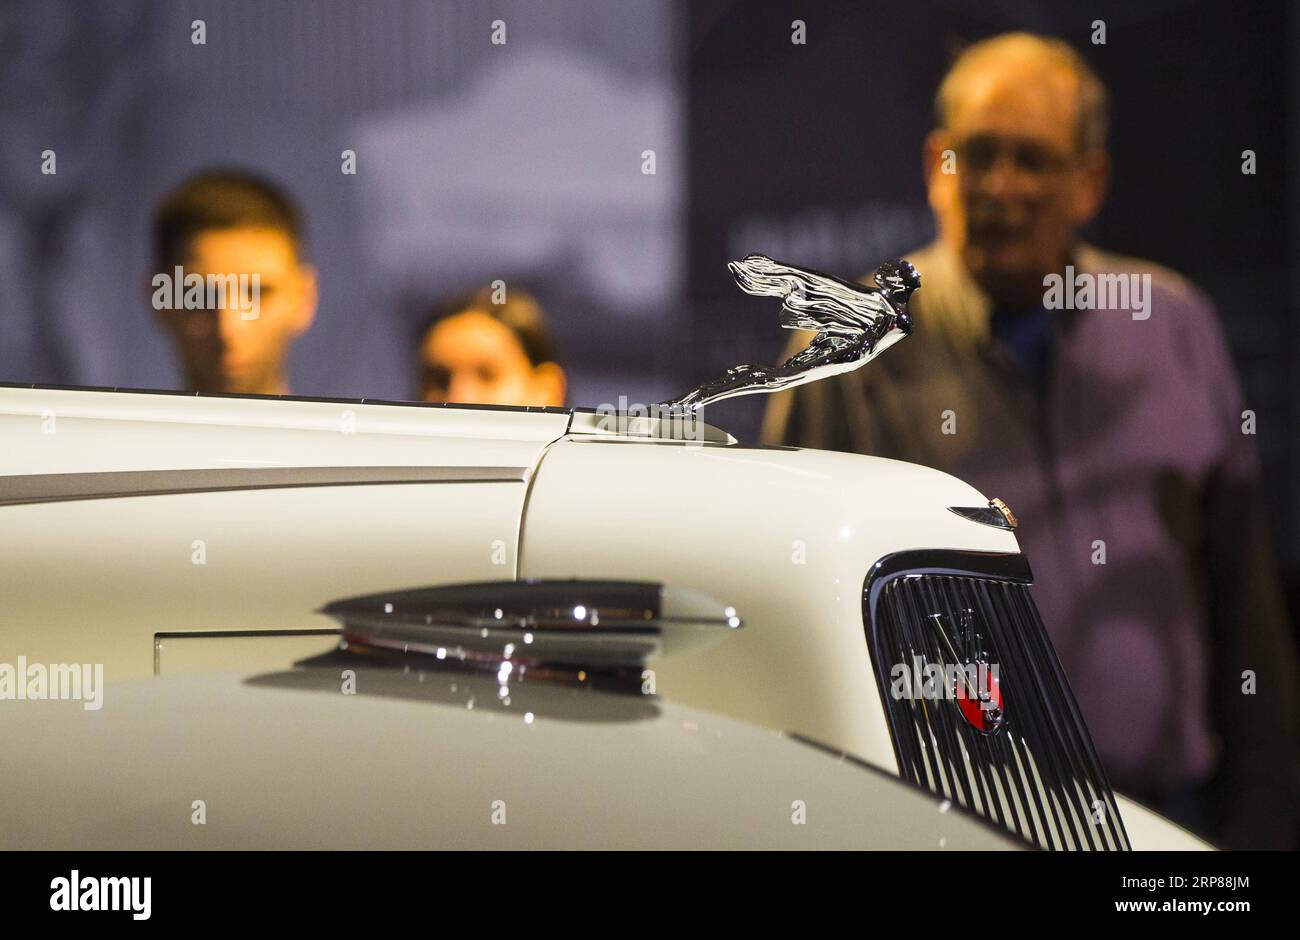 (190221) -- TORONTO, Feb. 21, 2019 -- Visitors look at a 1937 Cadillac Series 90 Hartmann Cabriolet during the Art and the Automobile exhibition of the 2019 Canadian International Auto Show (CIAS) at the Metro Toronto Convention Center in Toronto, Canada, Feb. 21, 2019. Featuring 15 rare and classic cars, the exhibition runs from Feb. 15 to 24 at the 2019 CIAS. ) CANADA-TORONTO-AUTO SHOW ZouxZheng PUBLICATIONxNOTxINxCHN Stock Photo